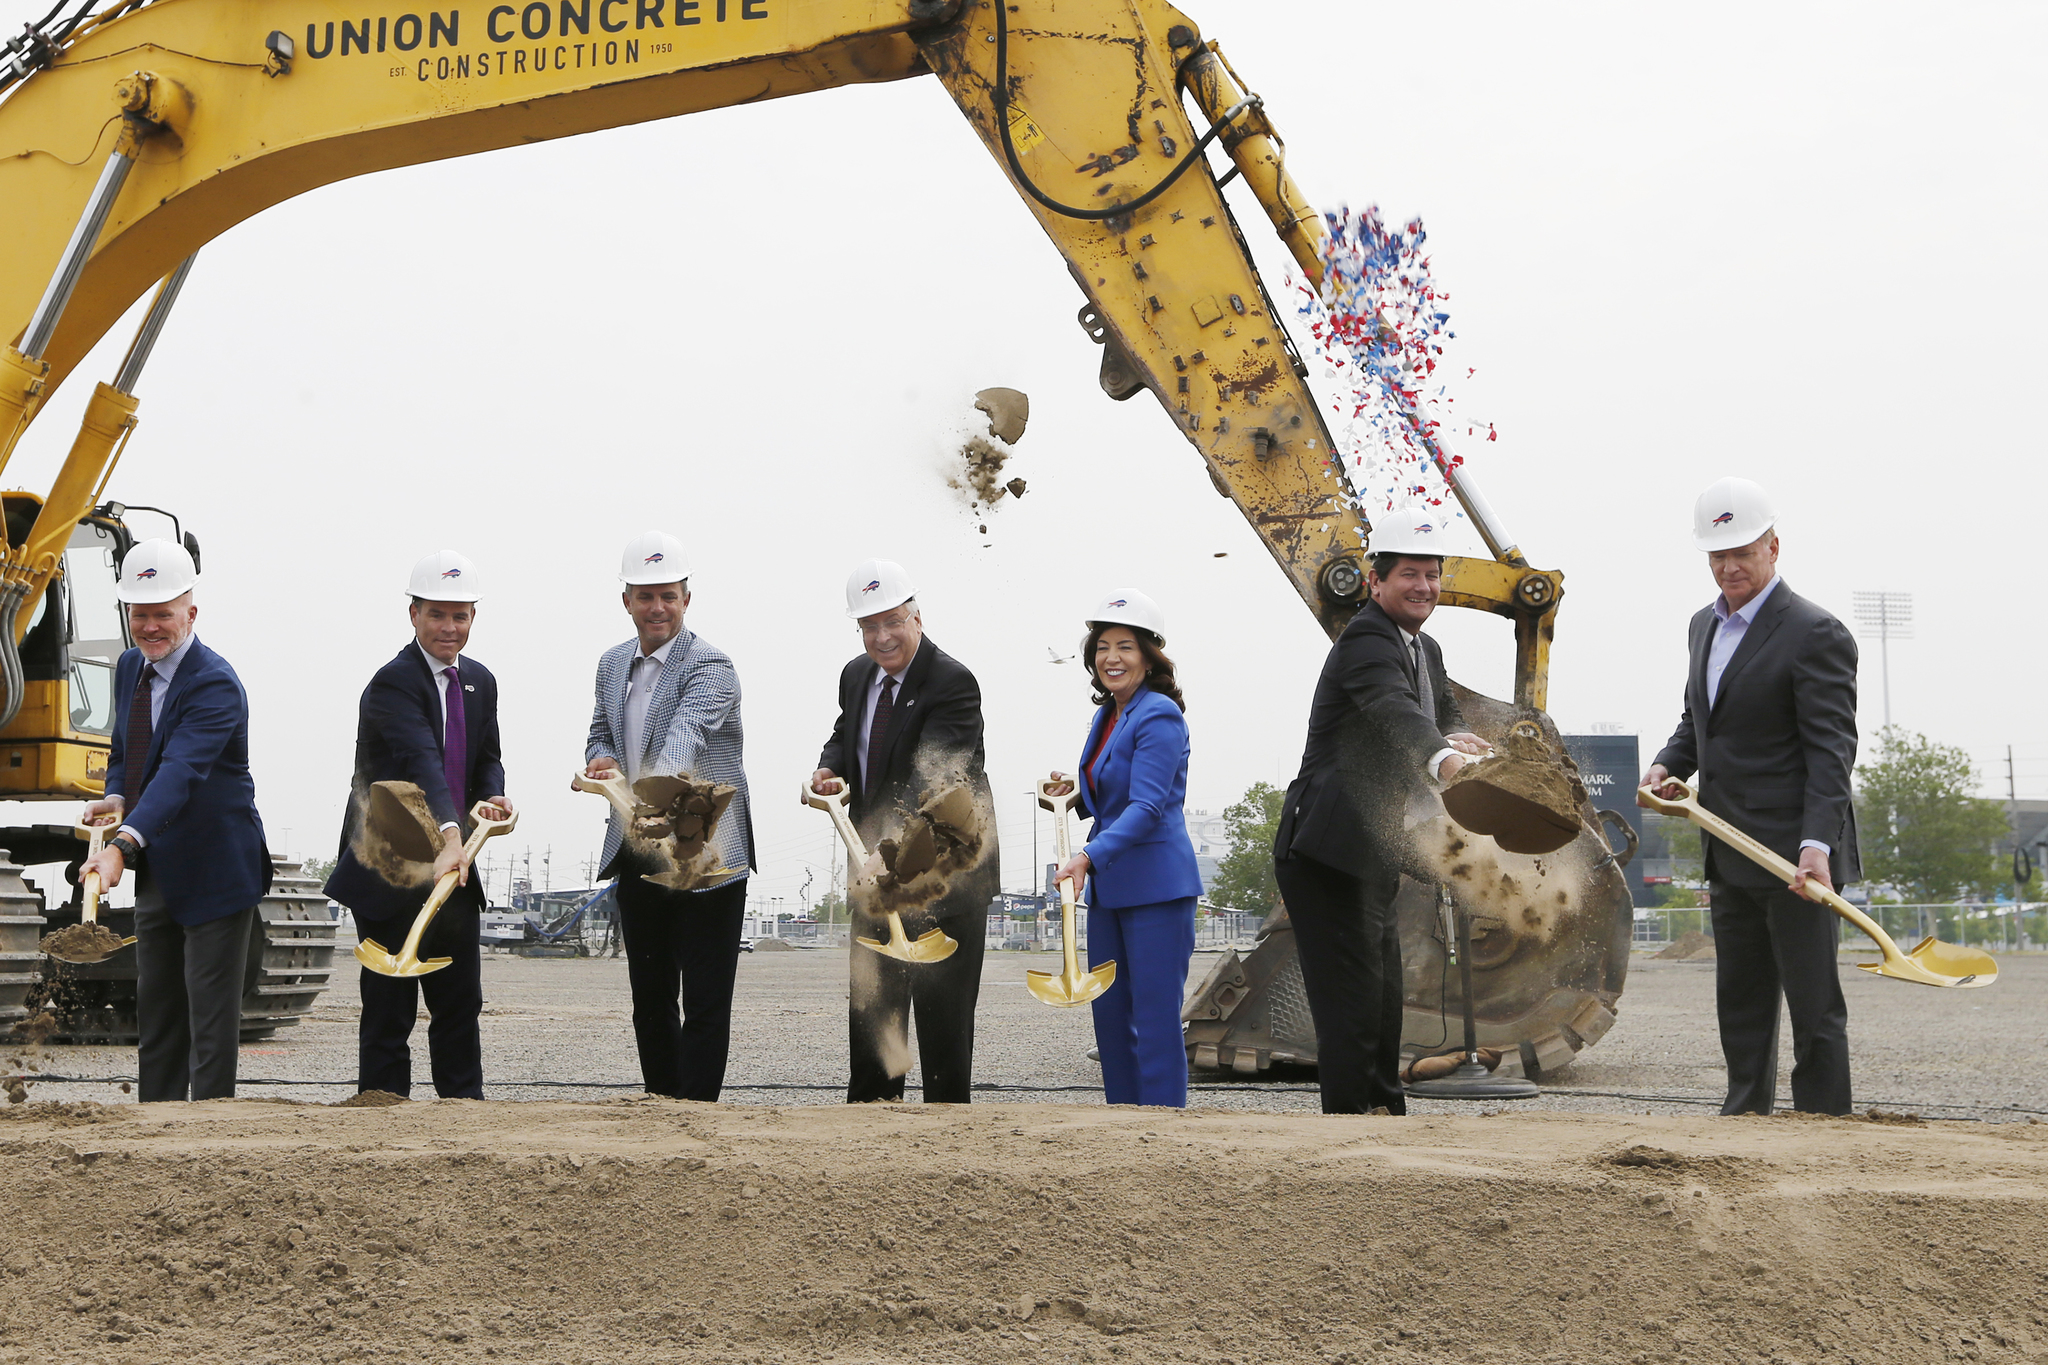 The groundbreaking ceremony at the site of the new Bills Stadium in Orchard Park, N.Y.